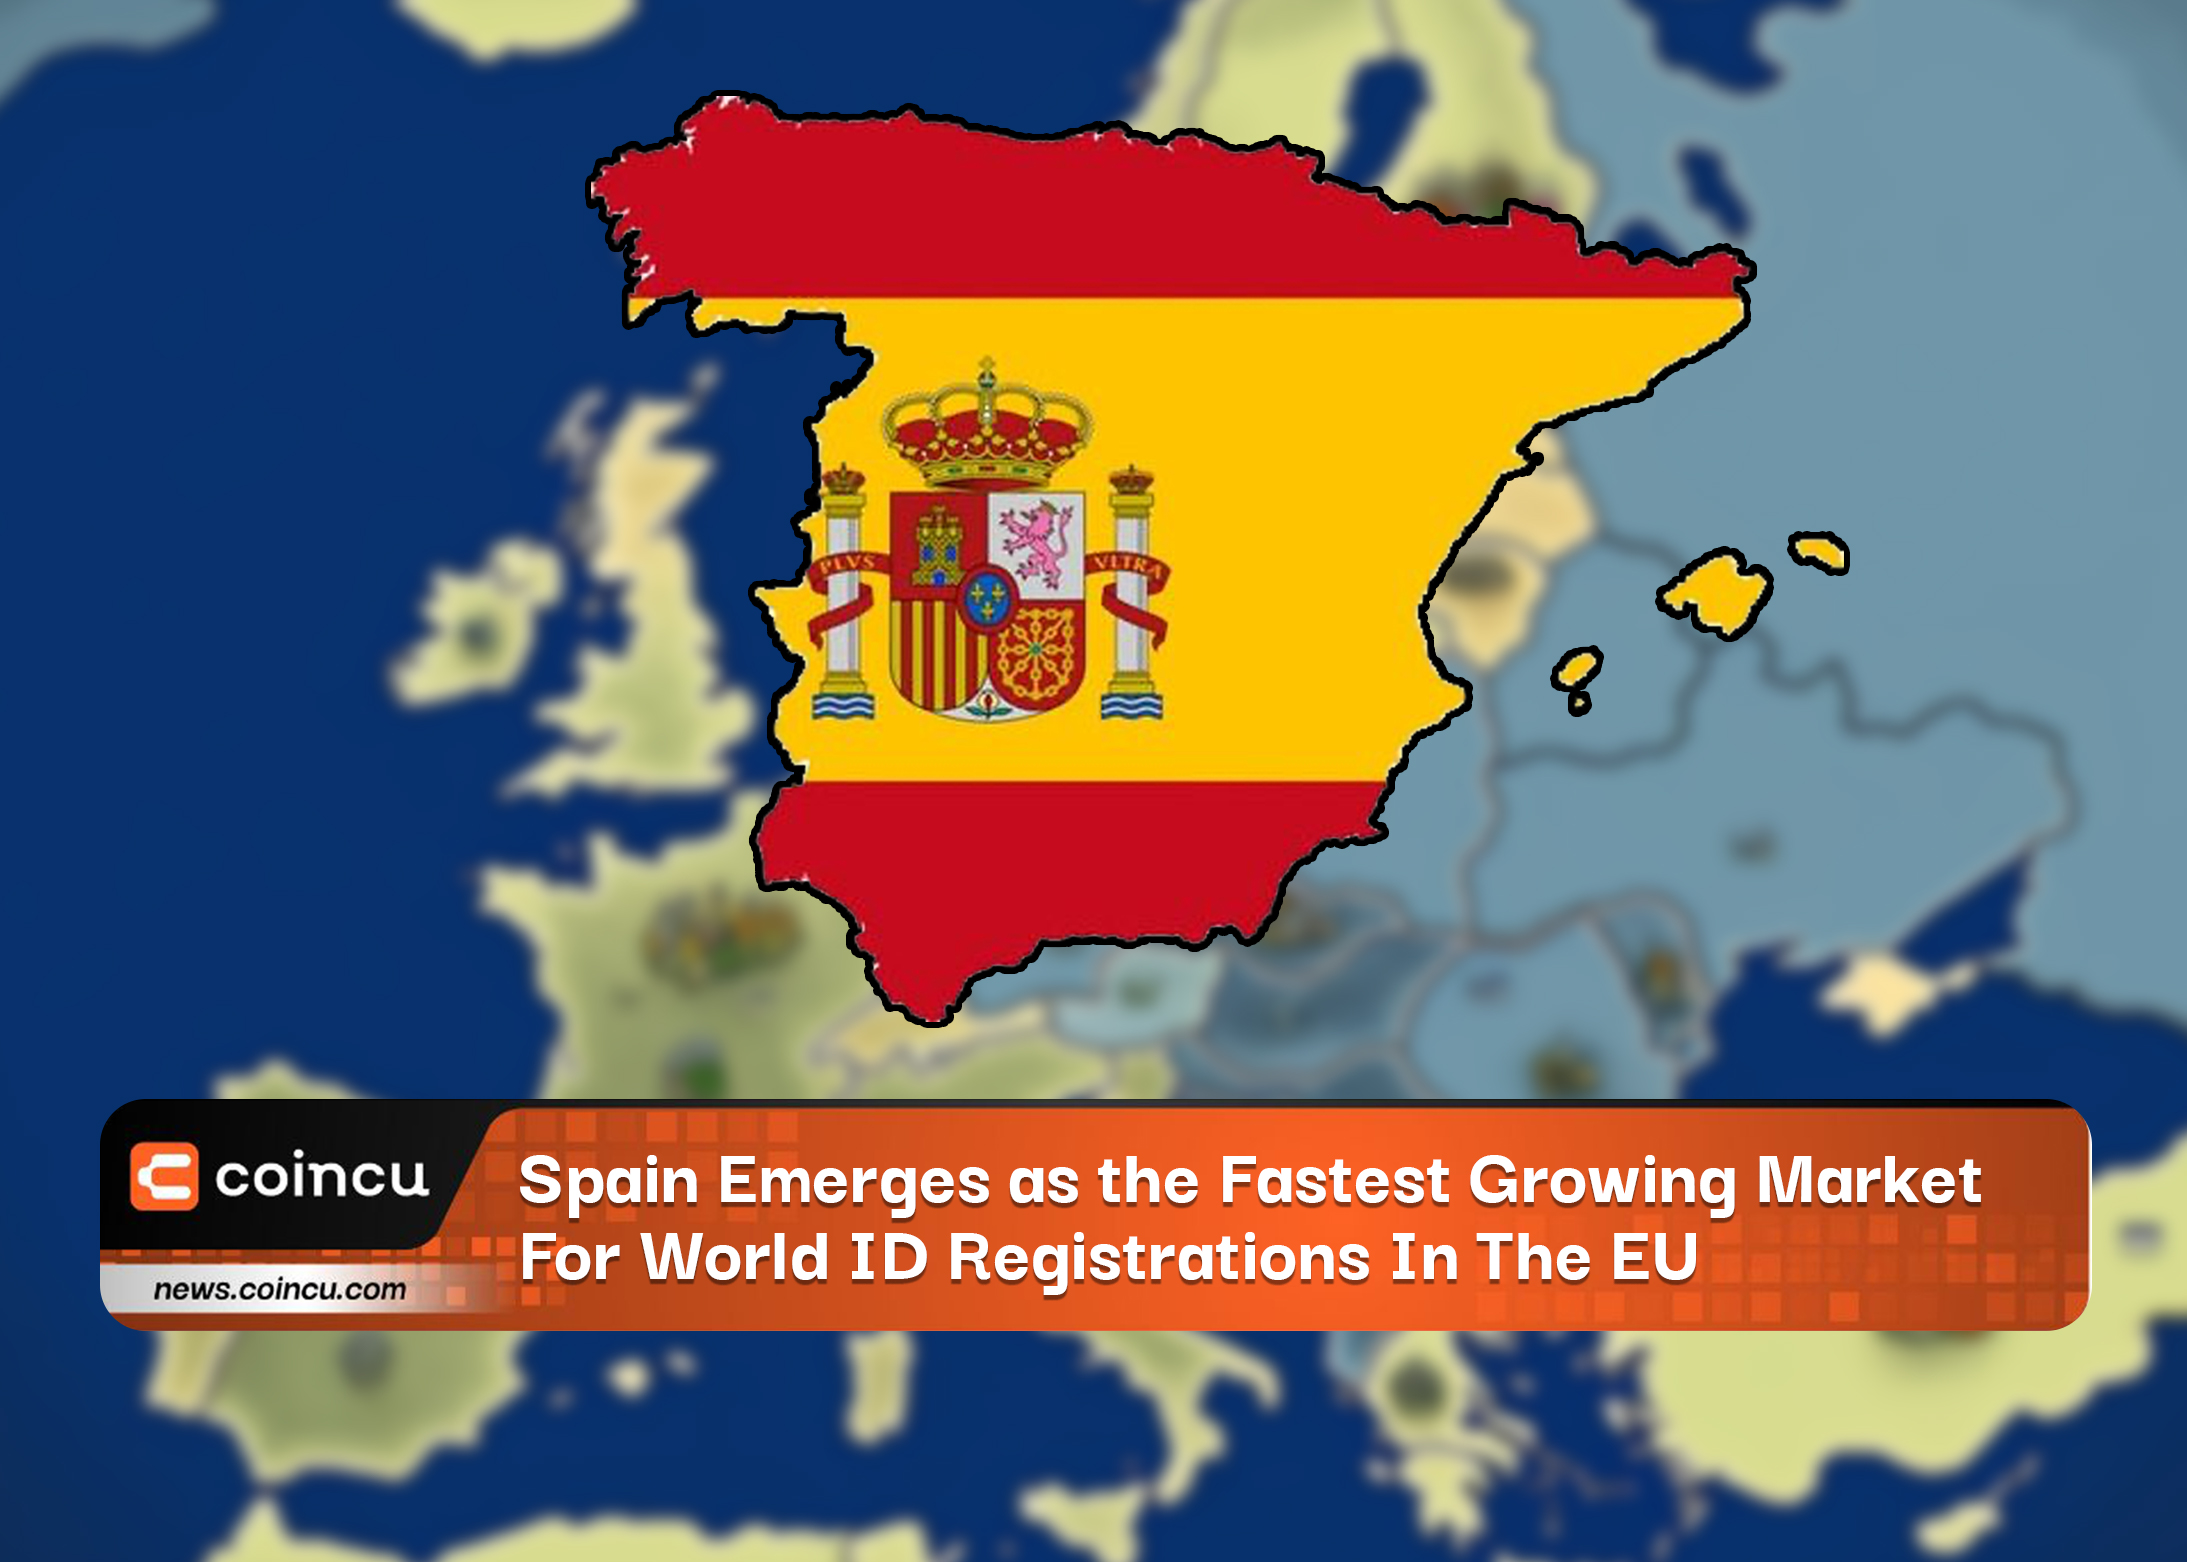 Spain Emerges as the Fastest Growing Market For World ID Registrations In The EU